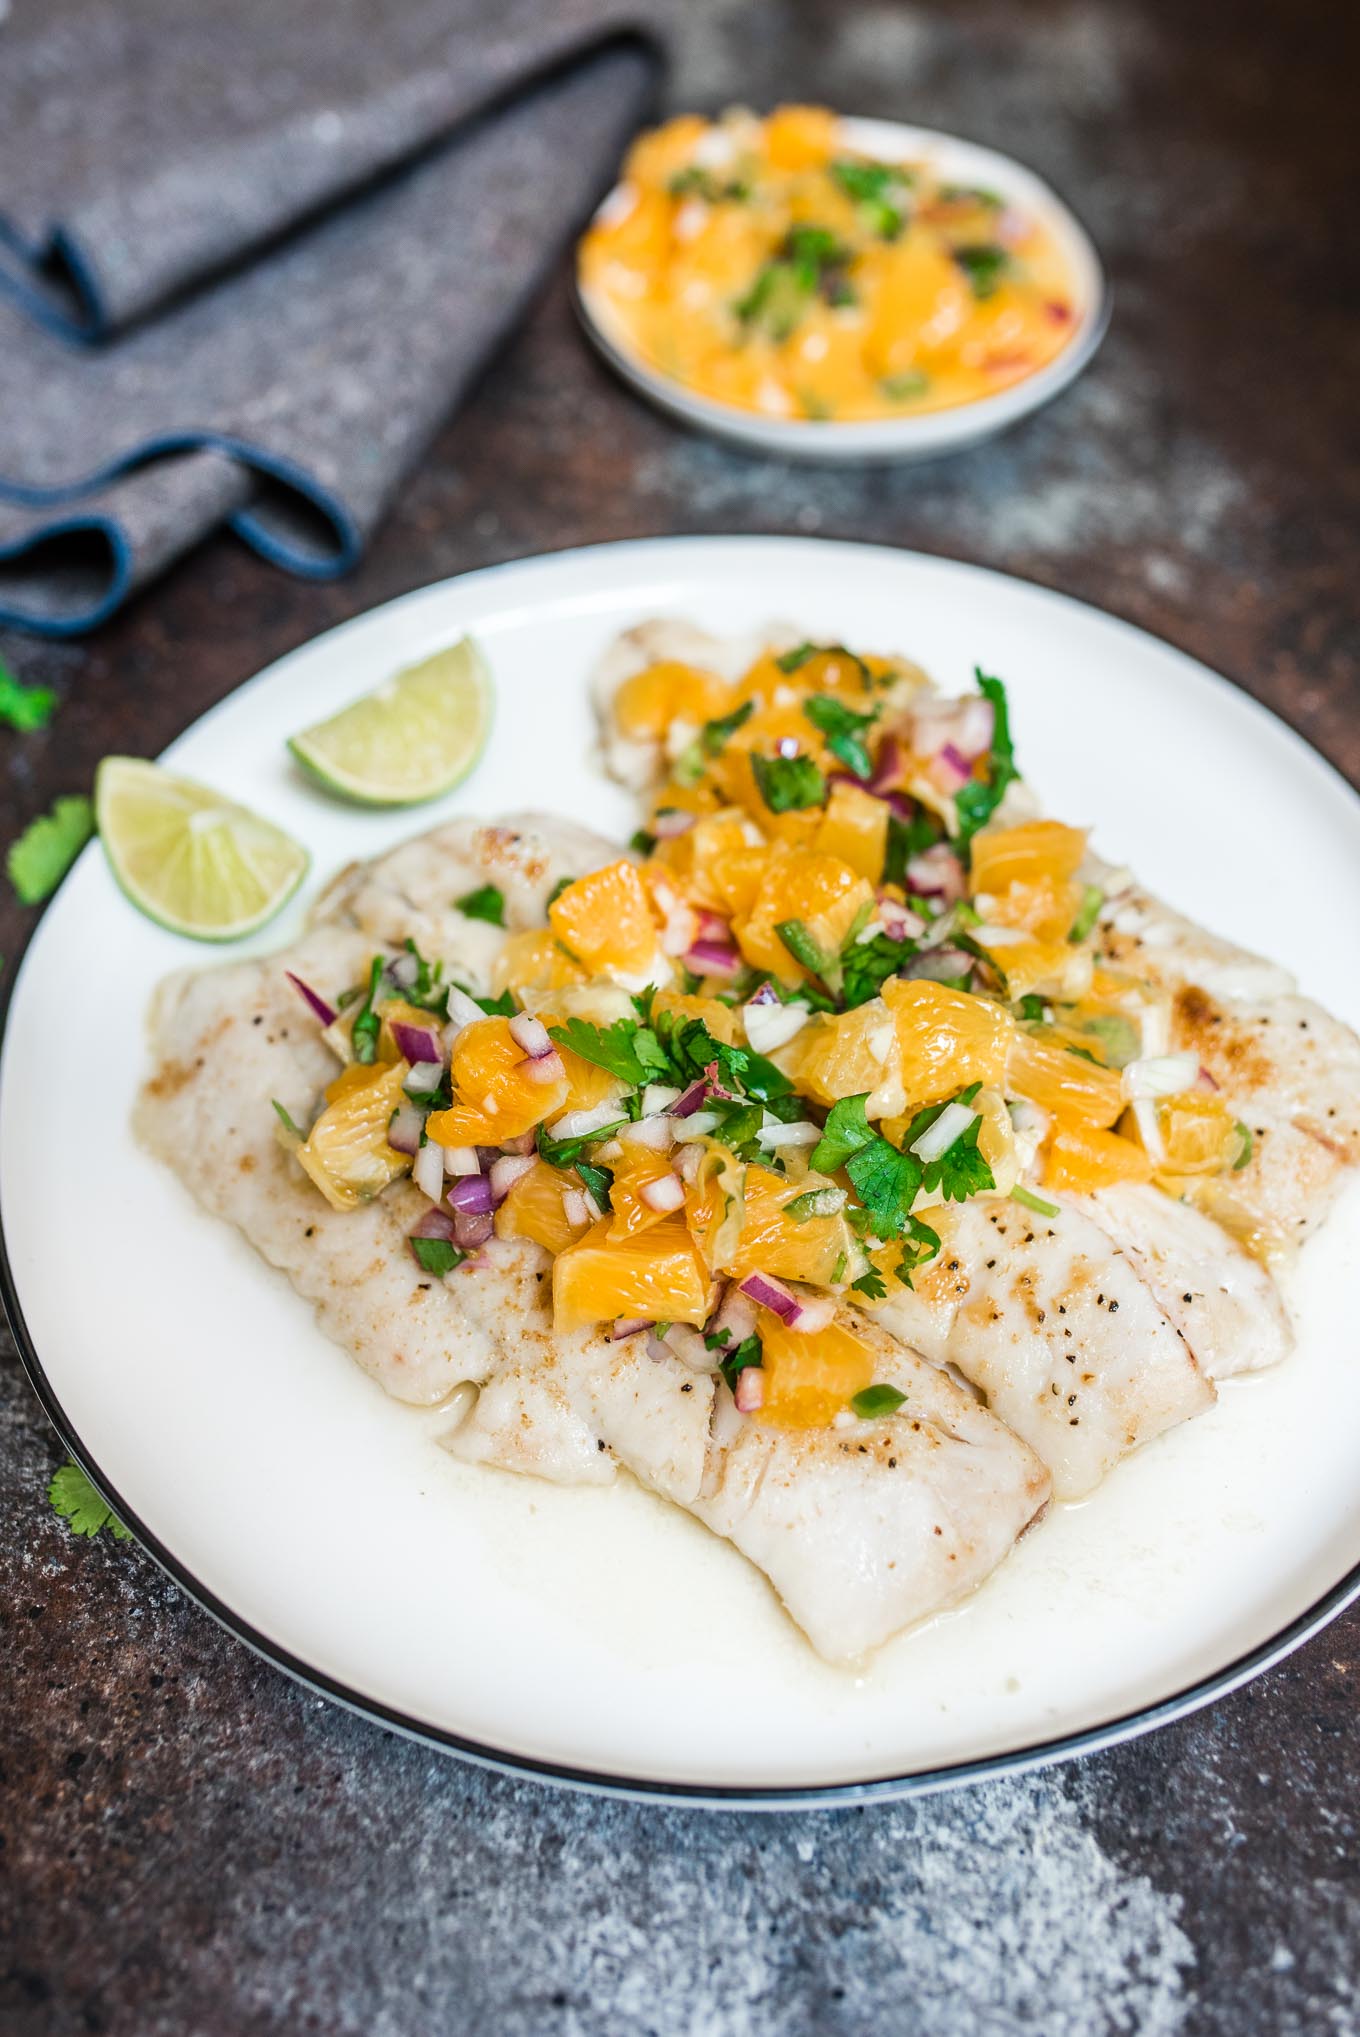 White Fish With Orange Salsa is a fresh and light dish that is gluten free, Whole 30 compliant and simple to prepare.